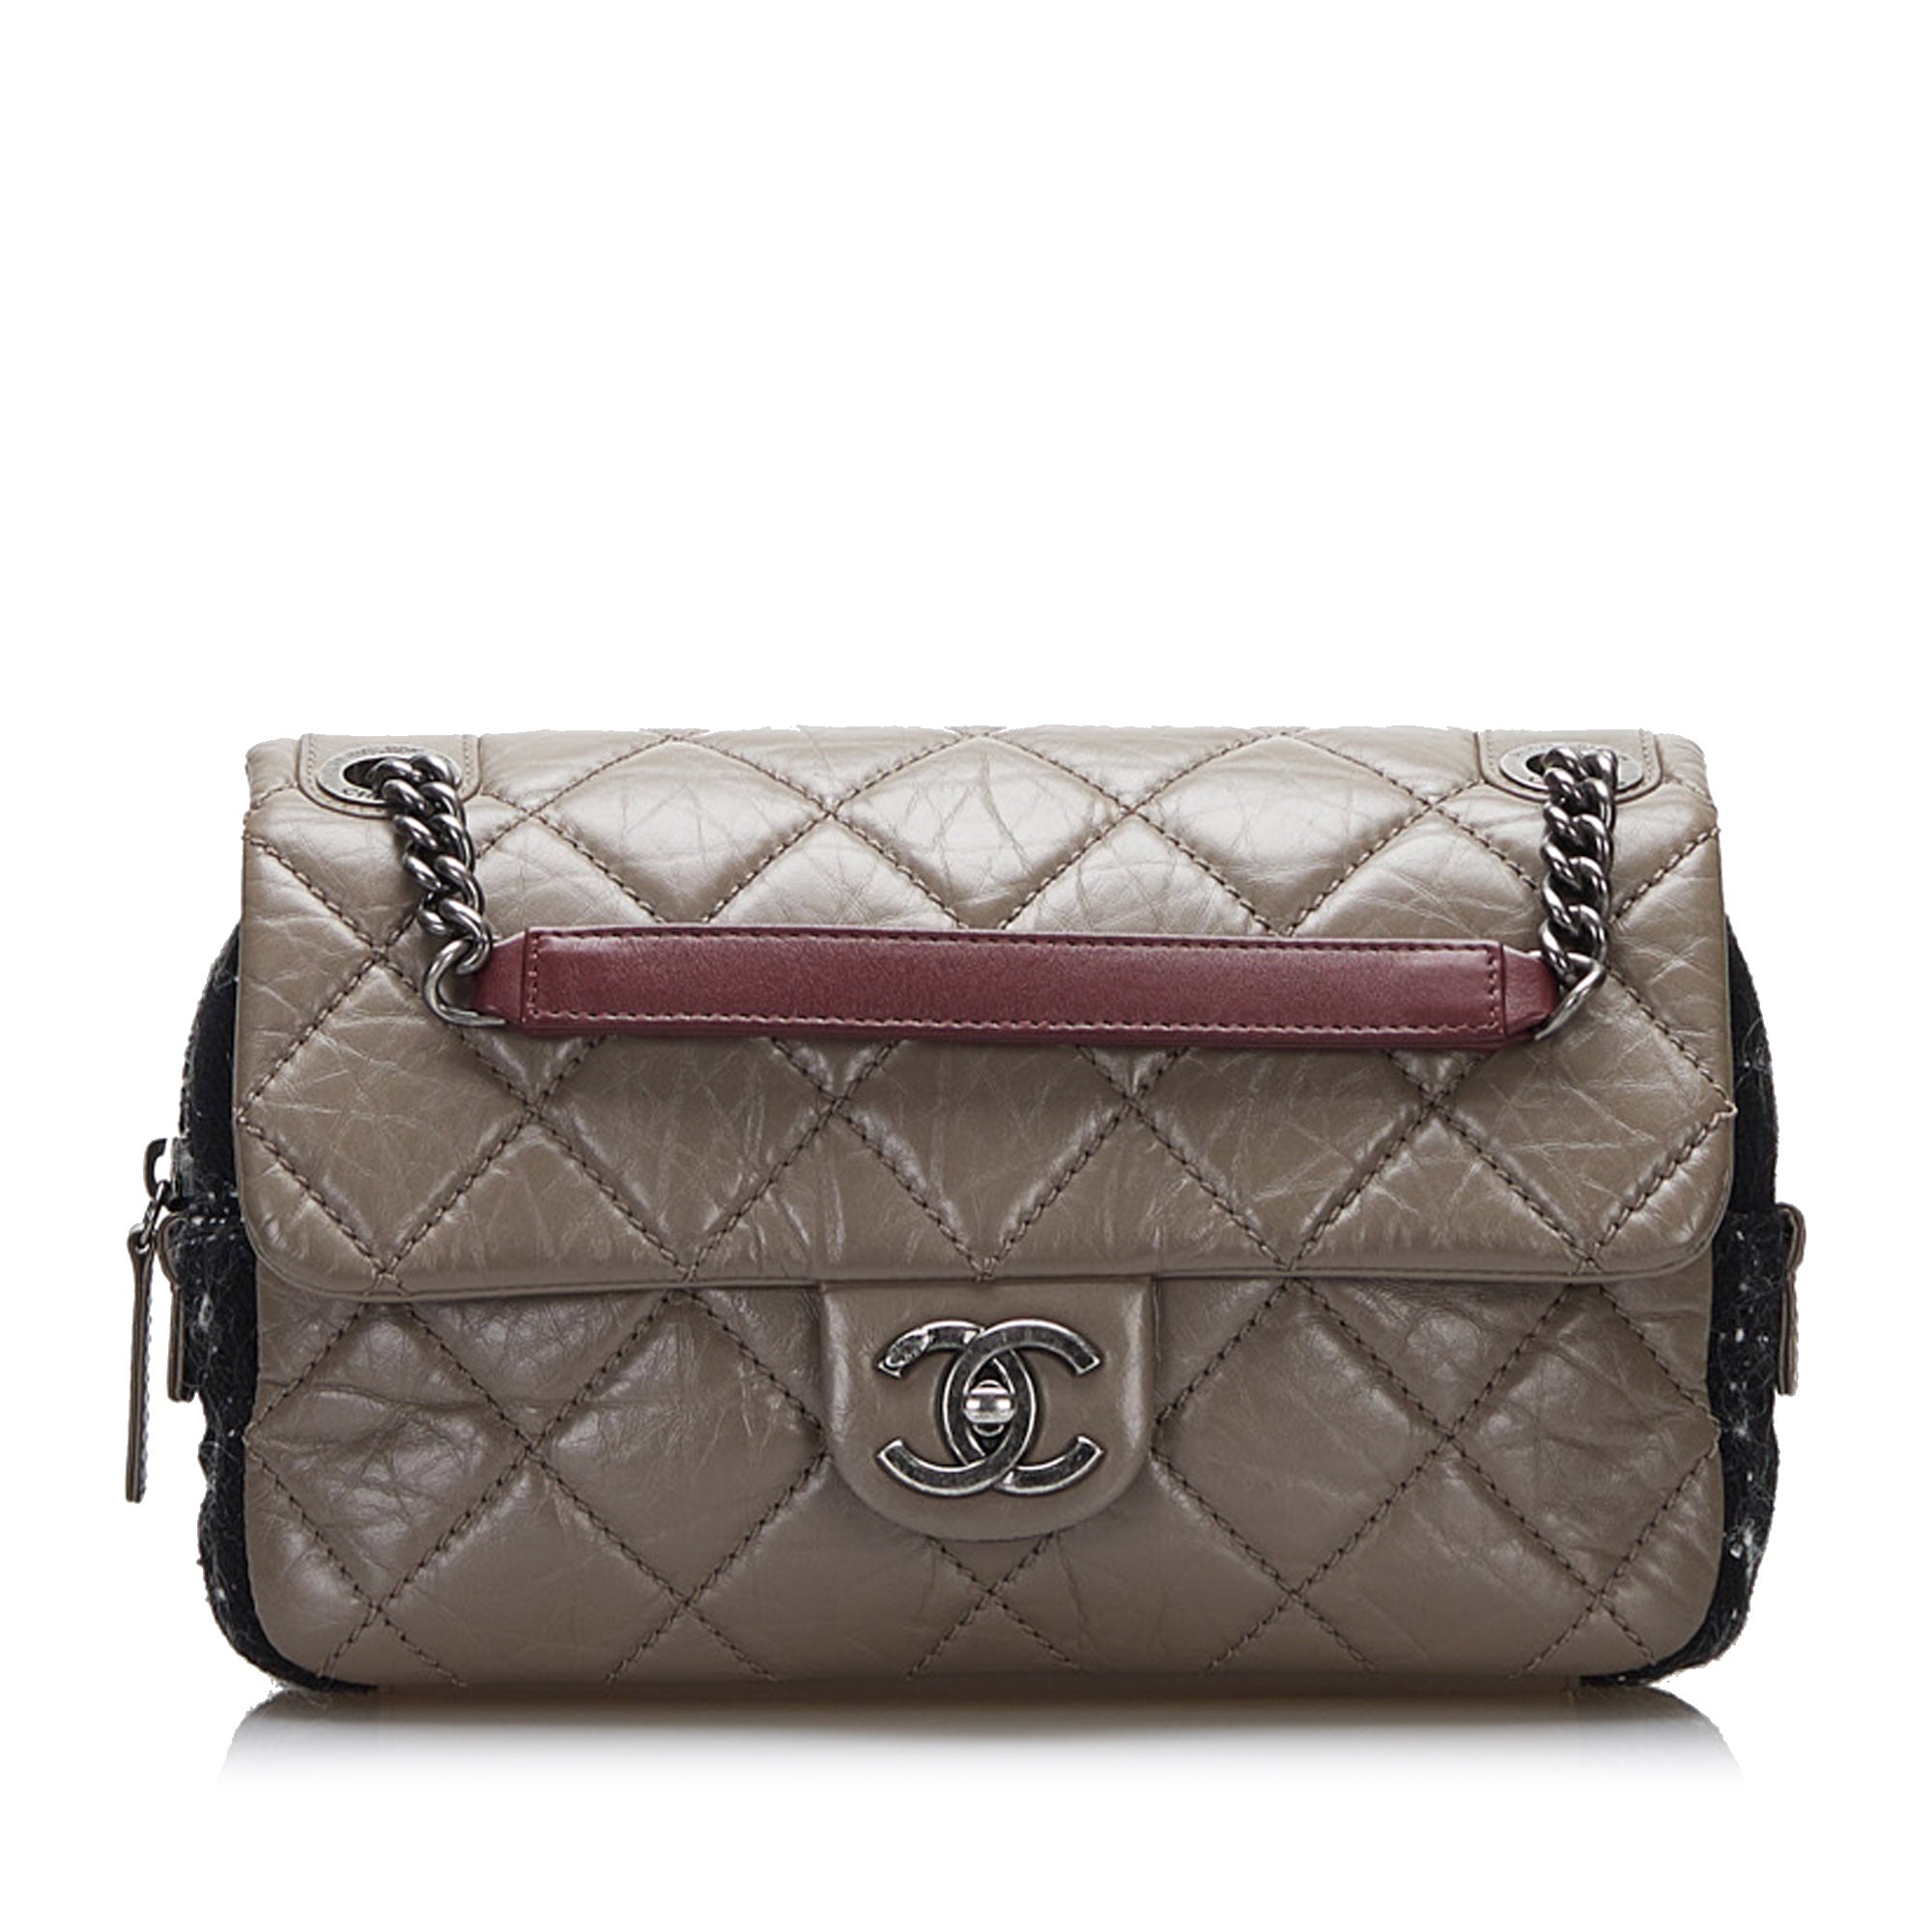 Chanel Quilted Clutch with Chain Metallic Gradient Pink/Silver